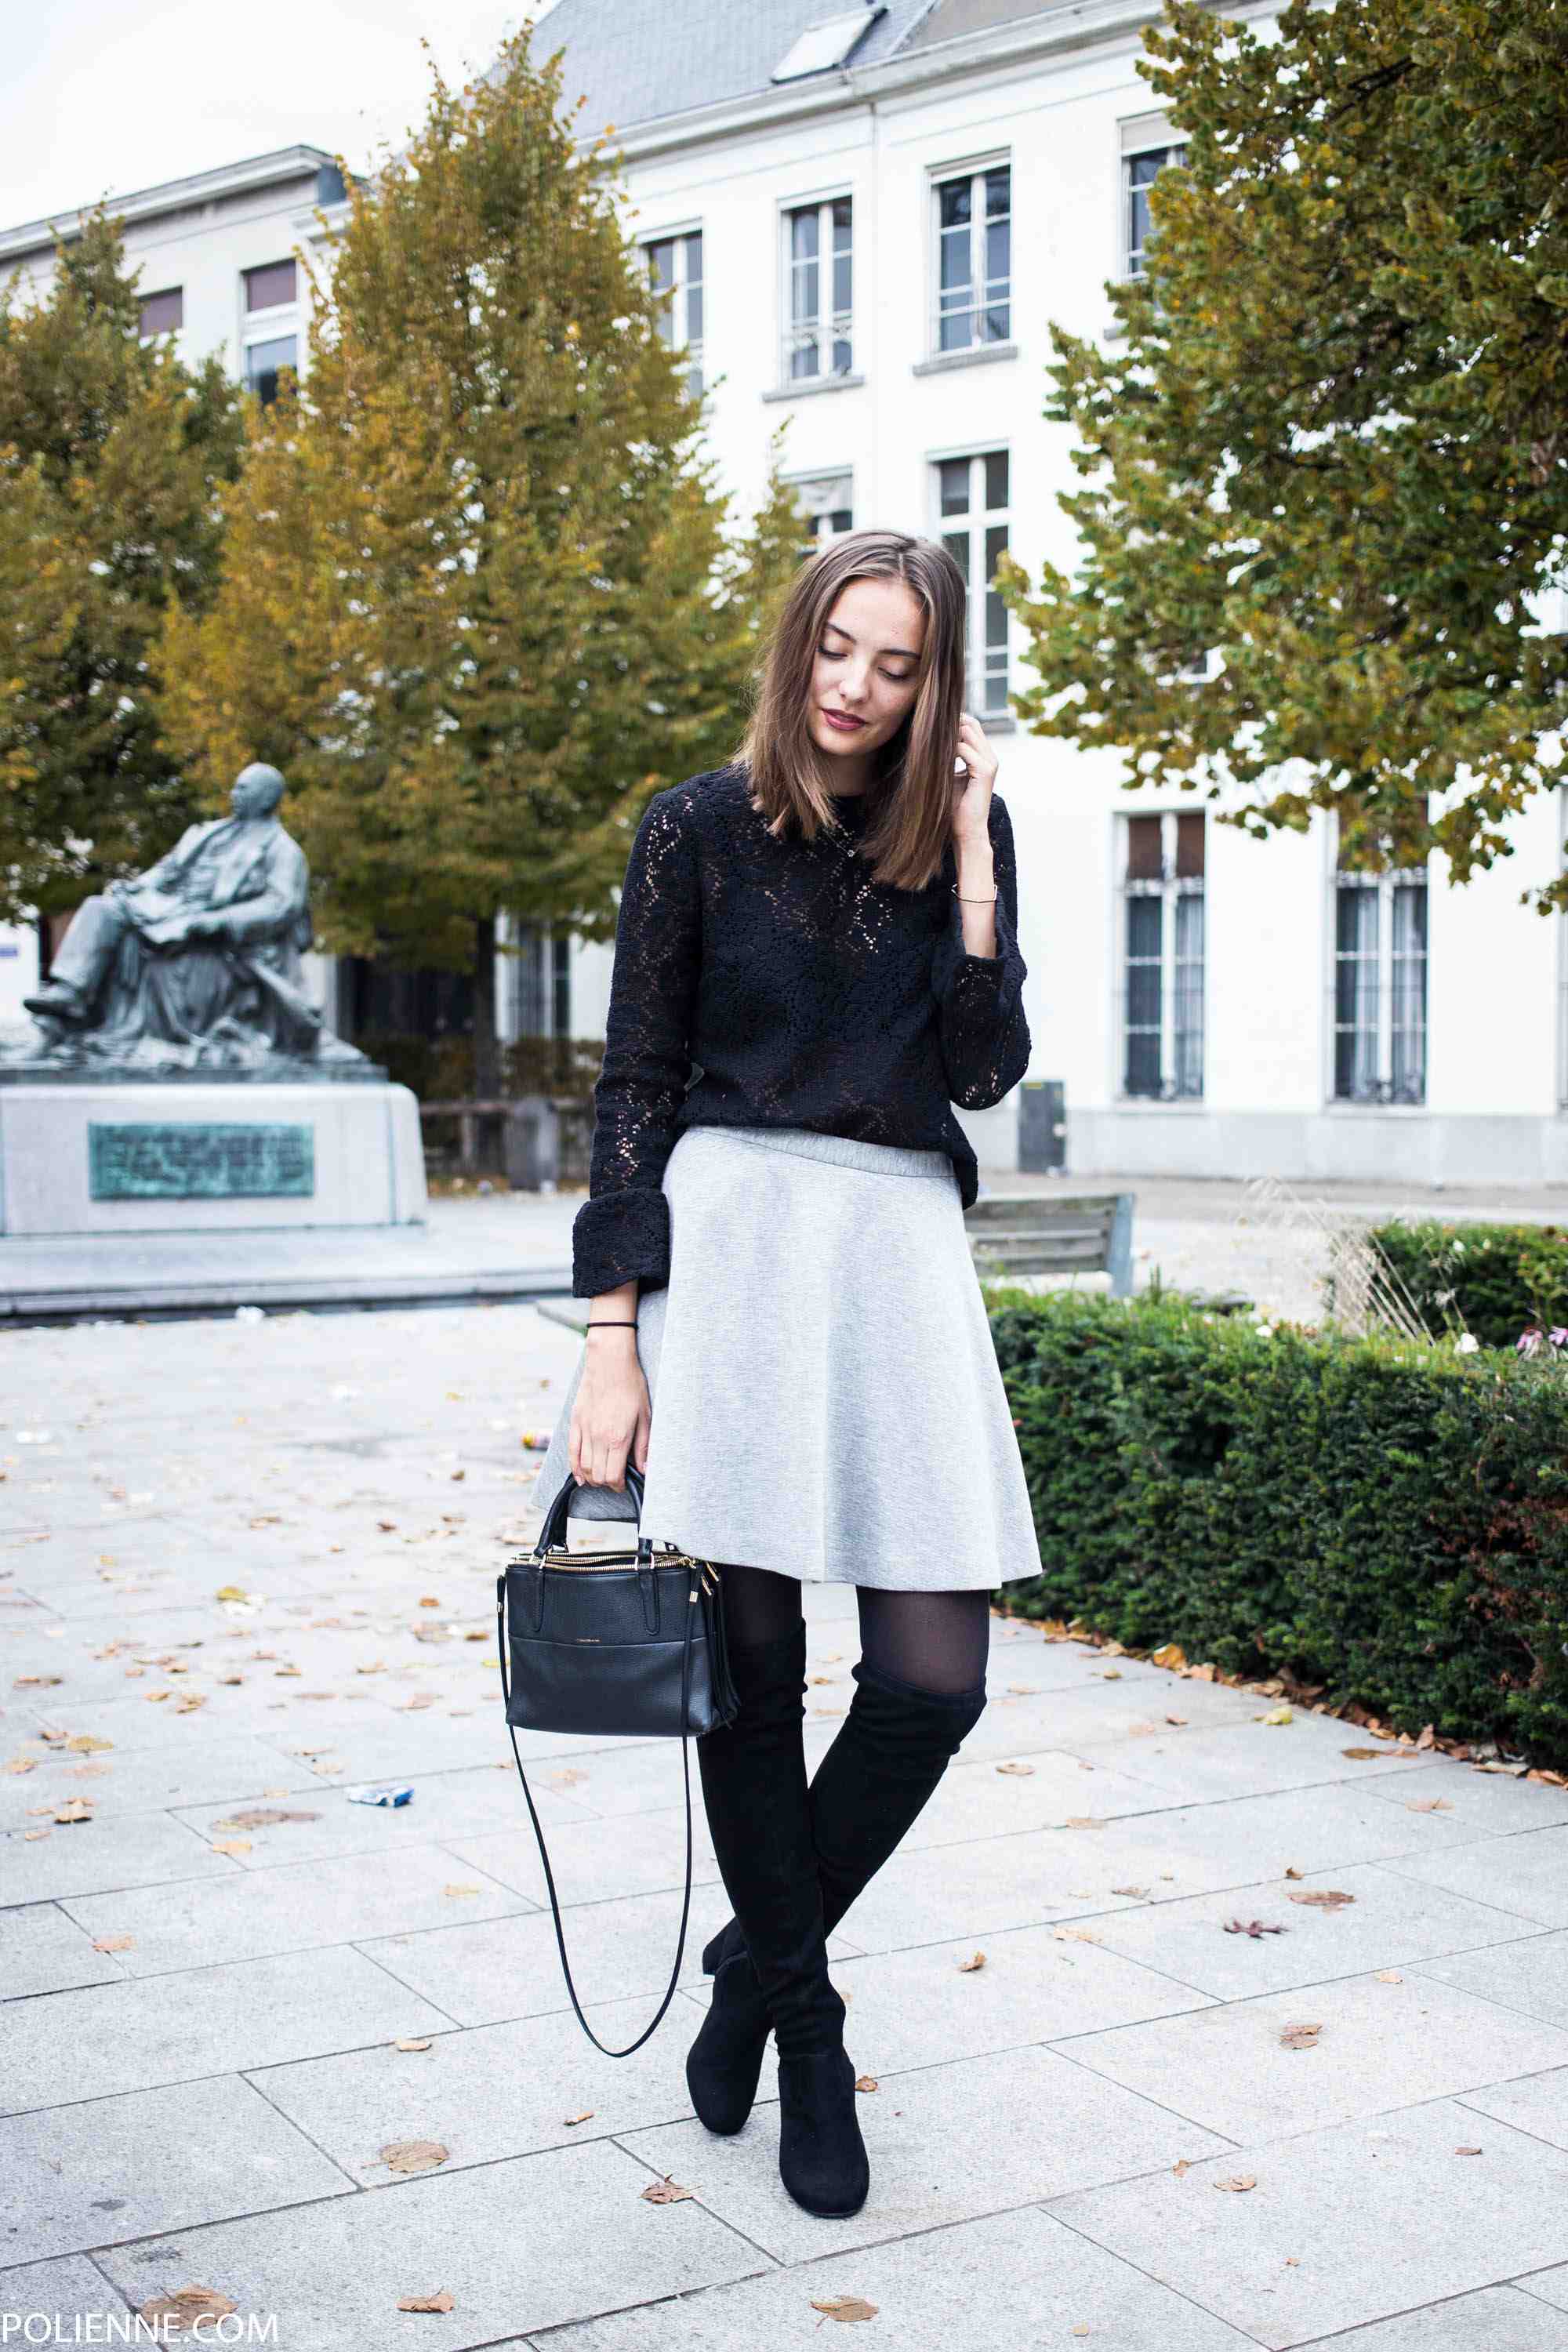 Quoi porter ce weekend ? 4 looks superbes à adopter